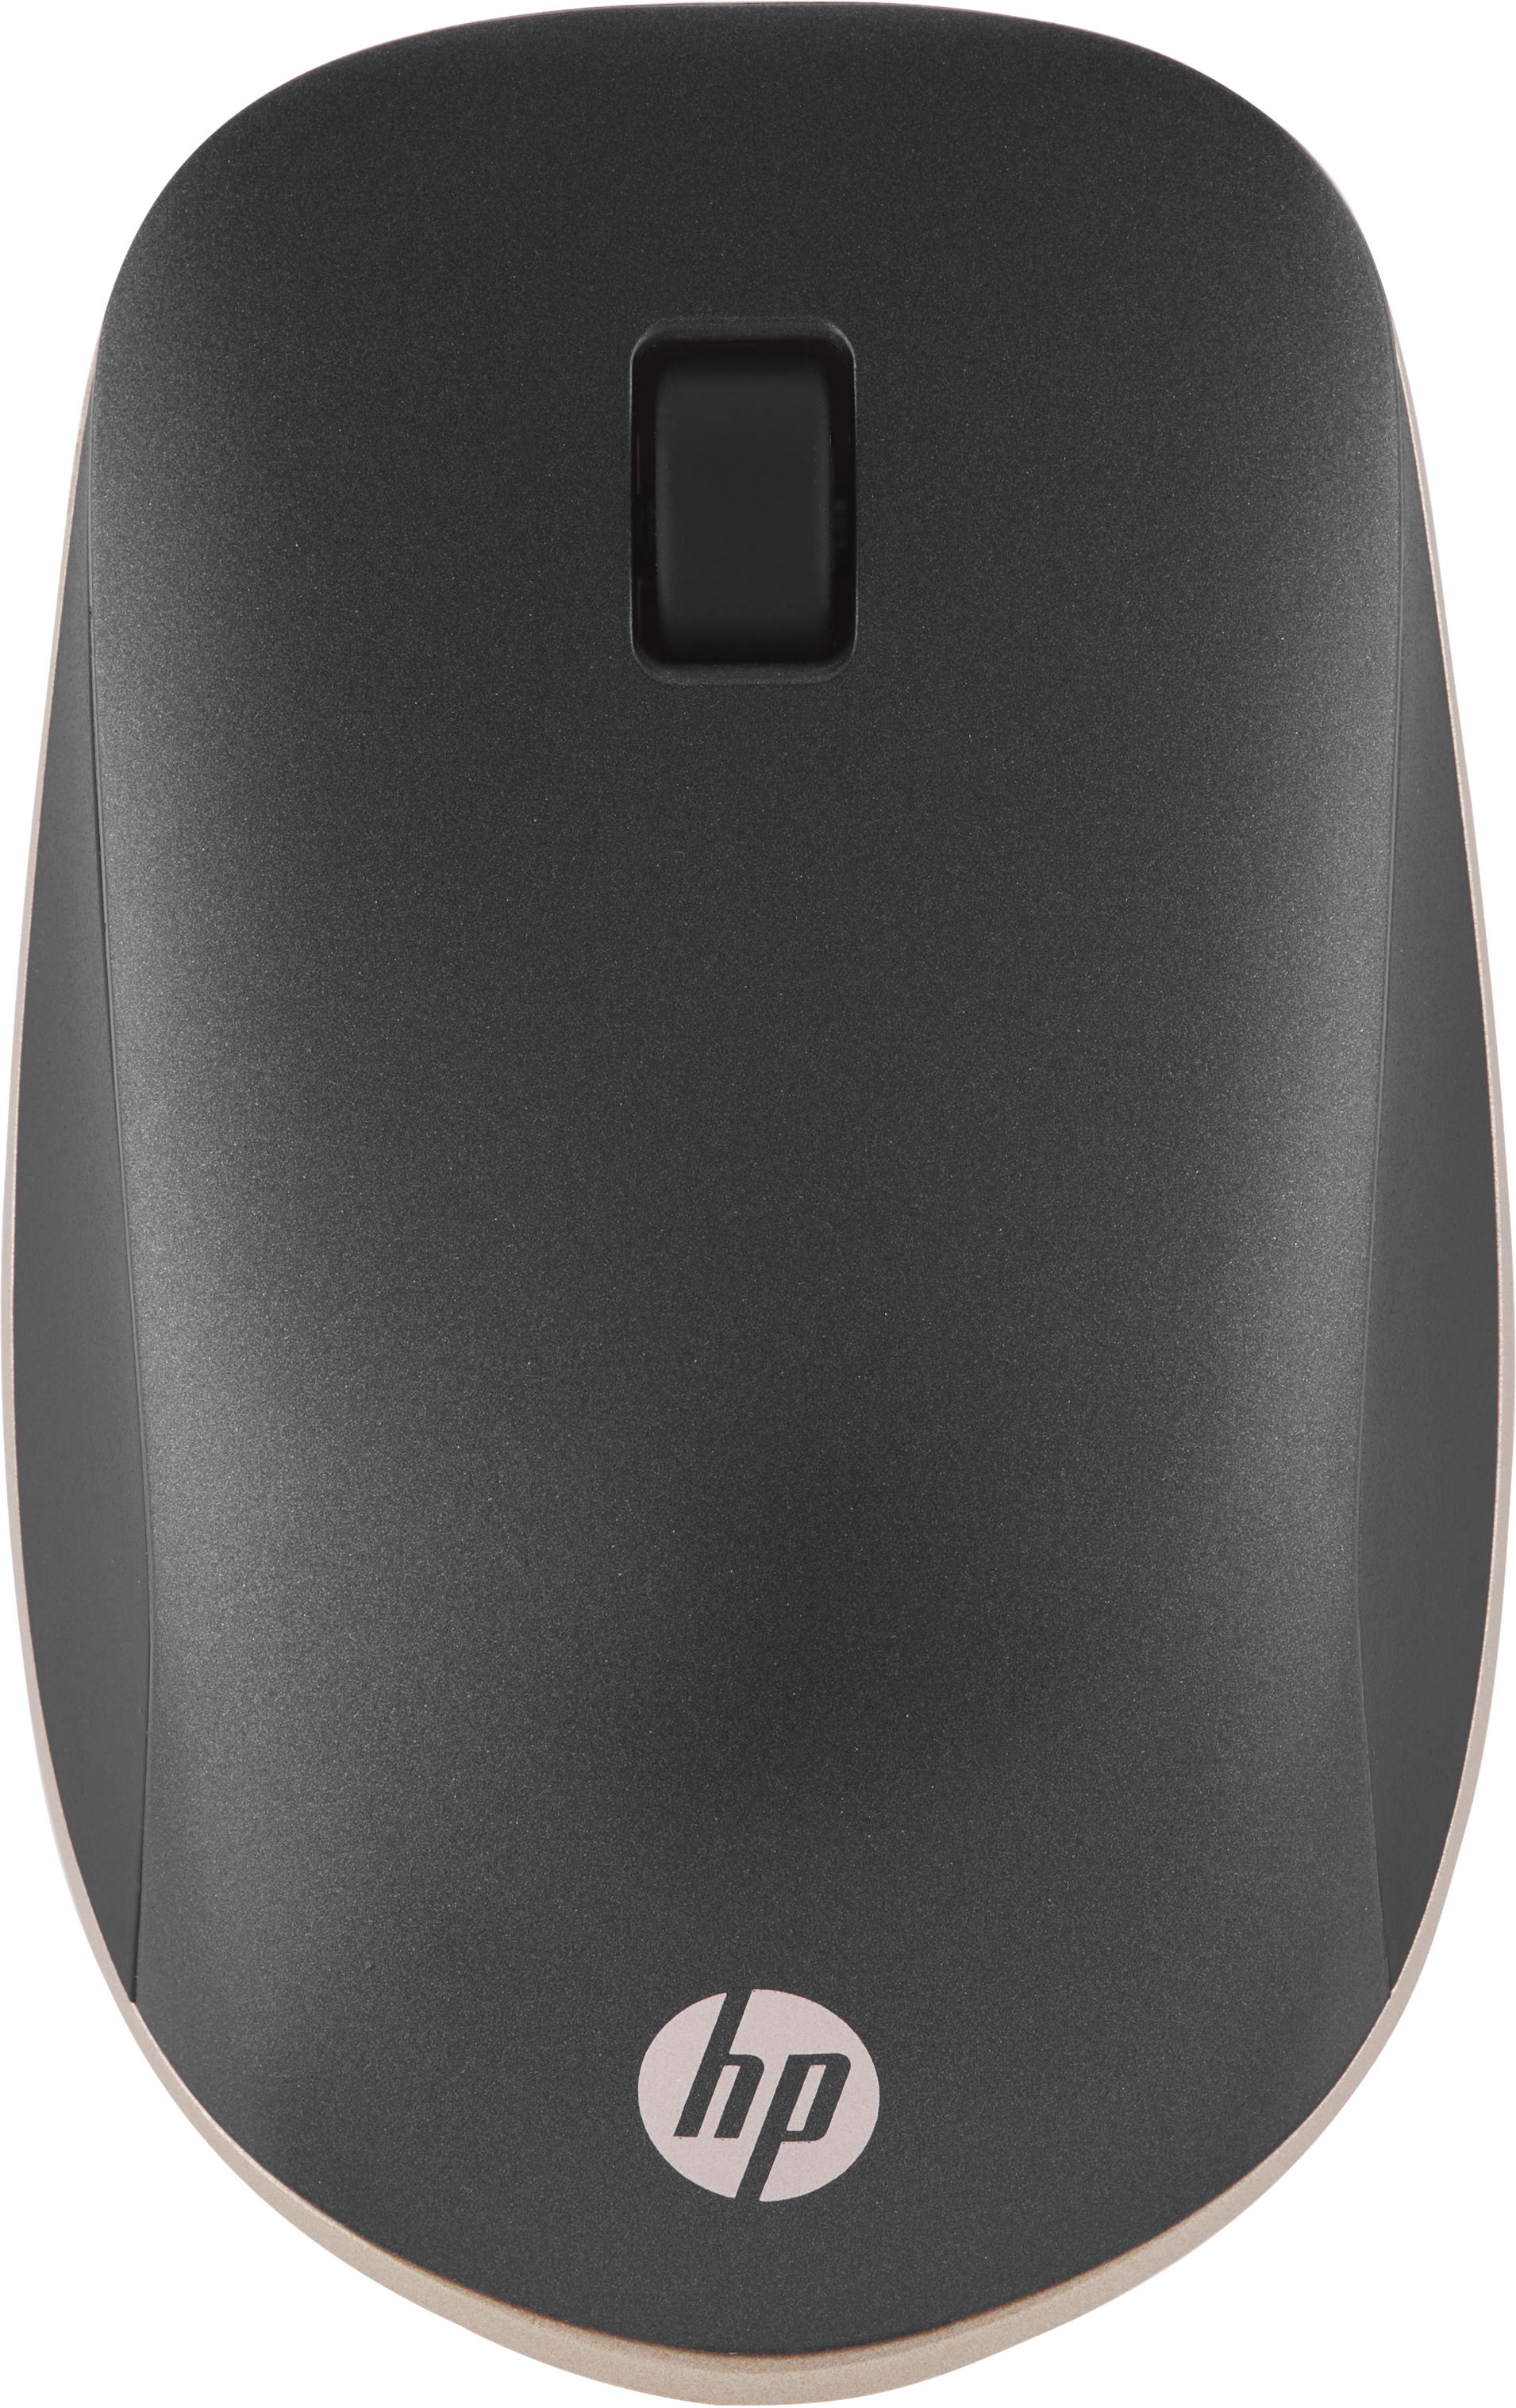 Image of HP Mouse 410 Slim Silver Bluetooth